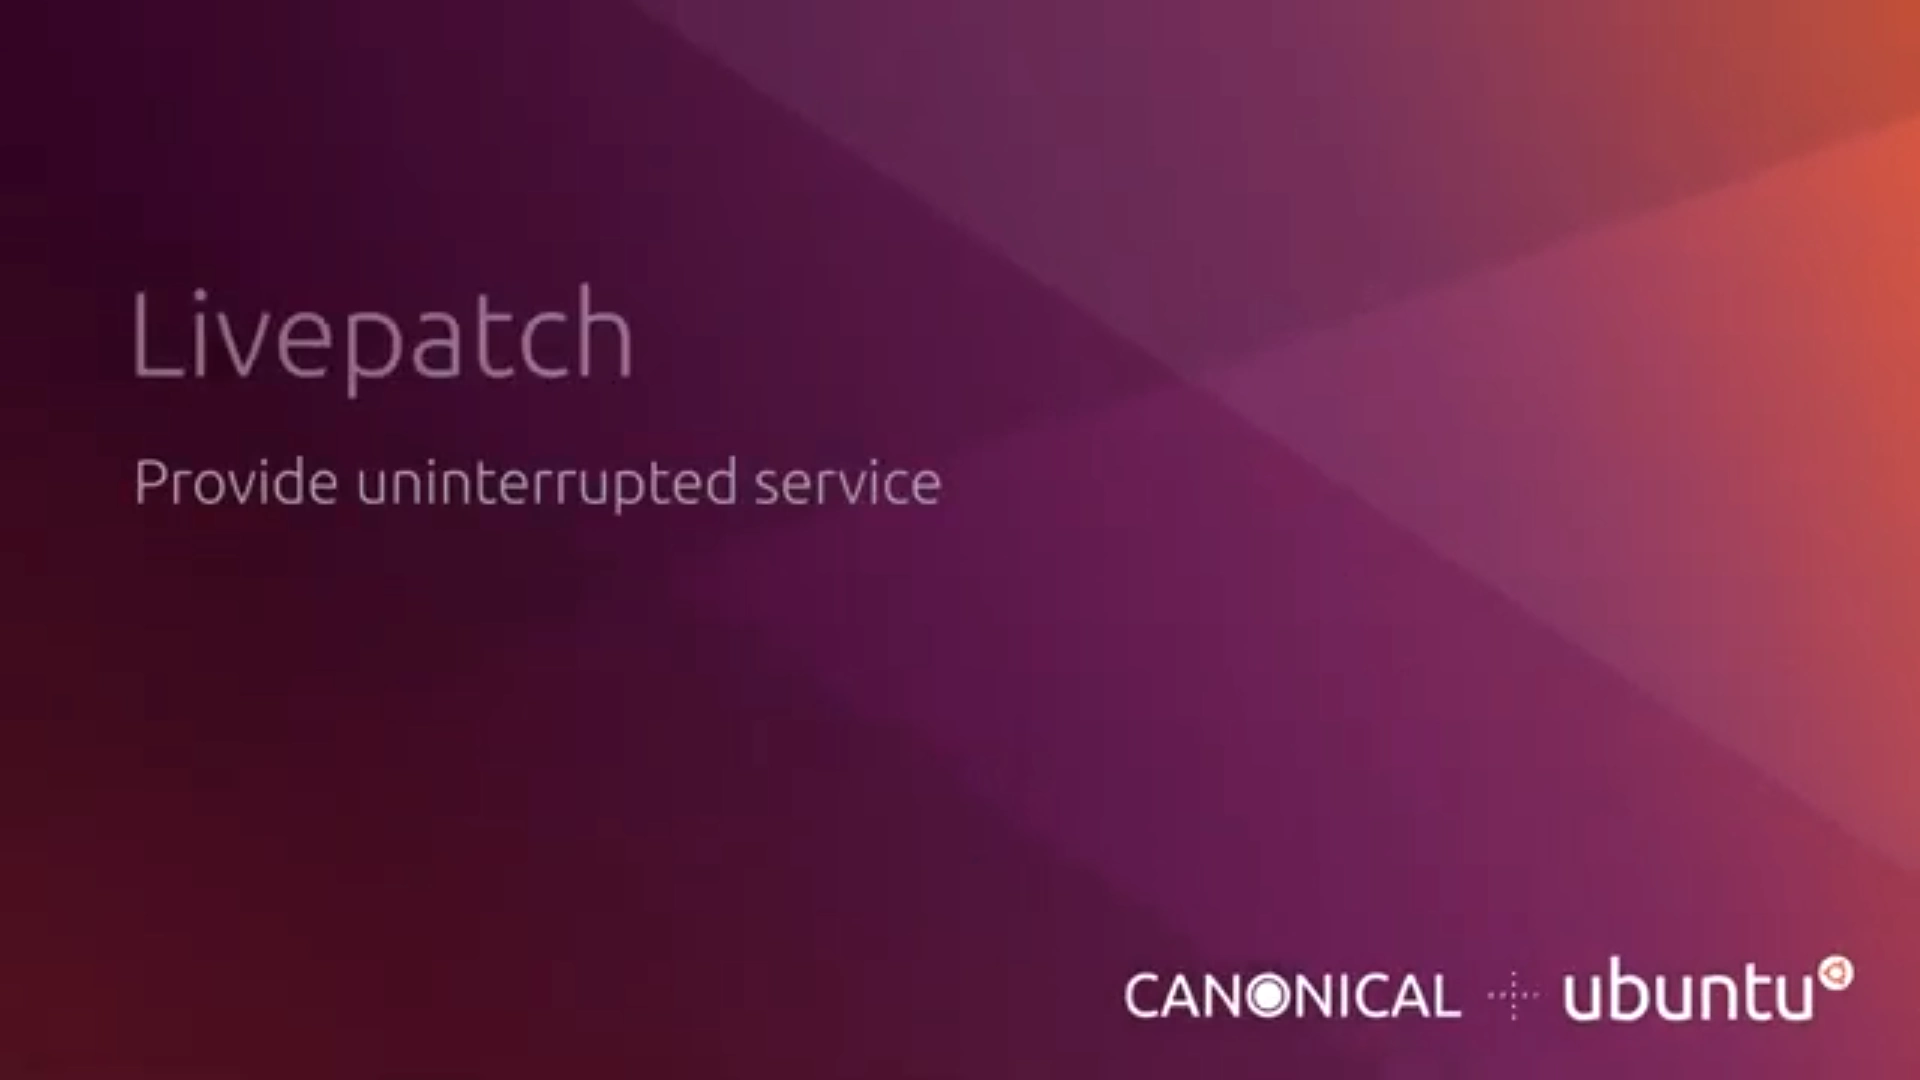 Canonical Announces Livepatch Support for Ubuntu Hardware Enablement Kernels